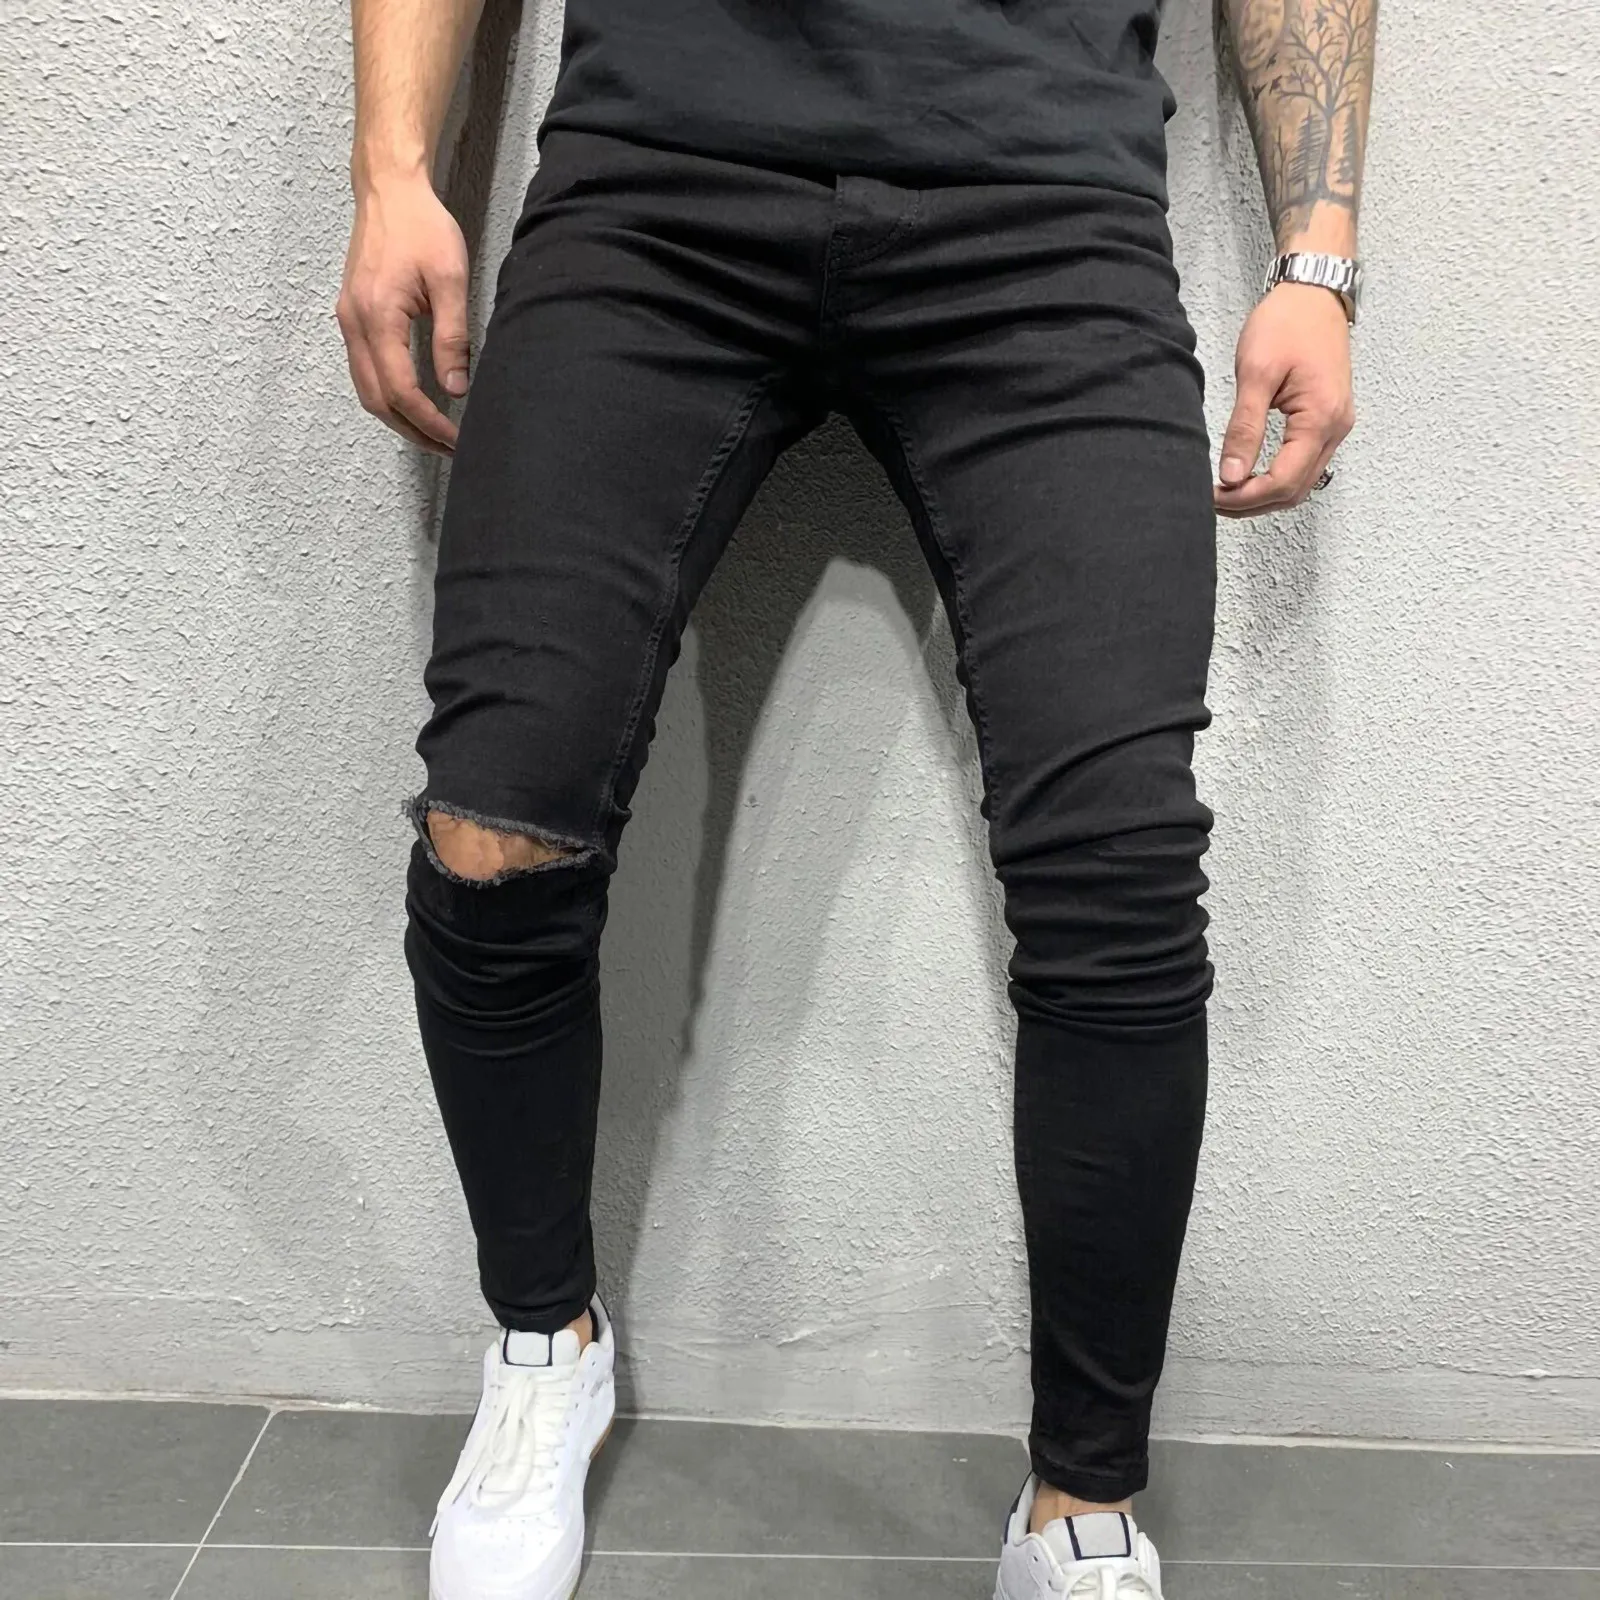 

New Fashion Men's Ripped Jeans Men's Mid Ripped Denim Frayed Hem Casual Stretch Tight Jeans Denim Trousers